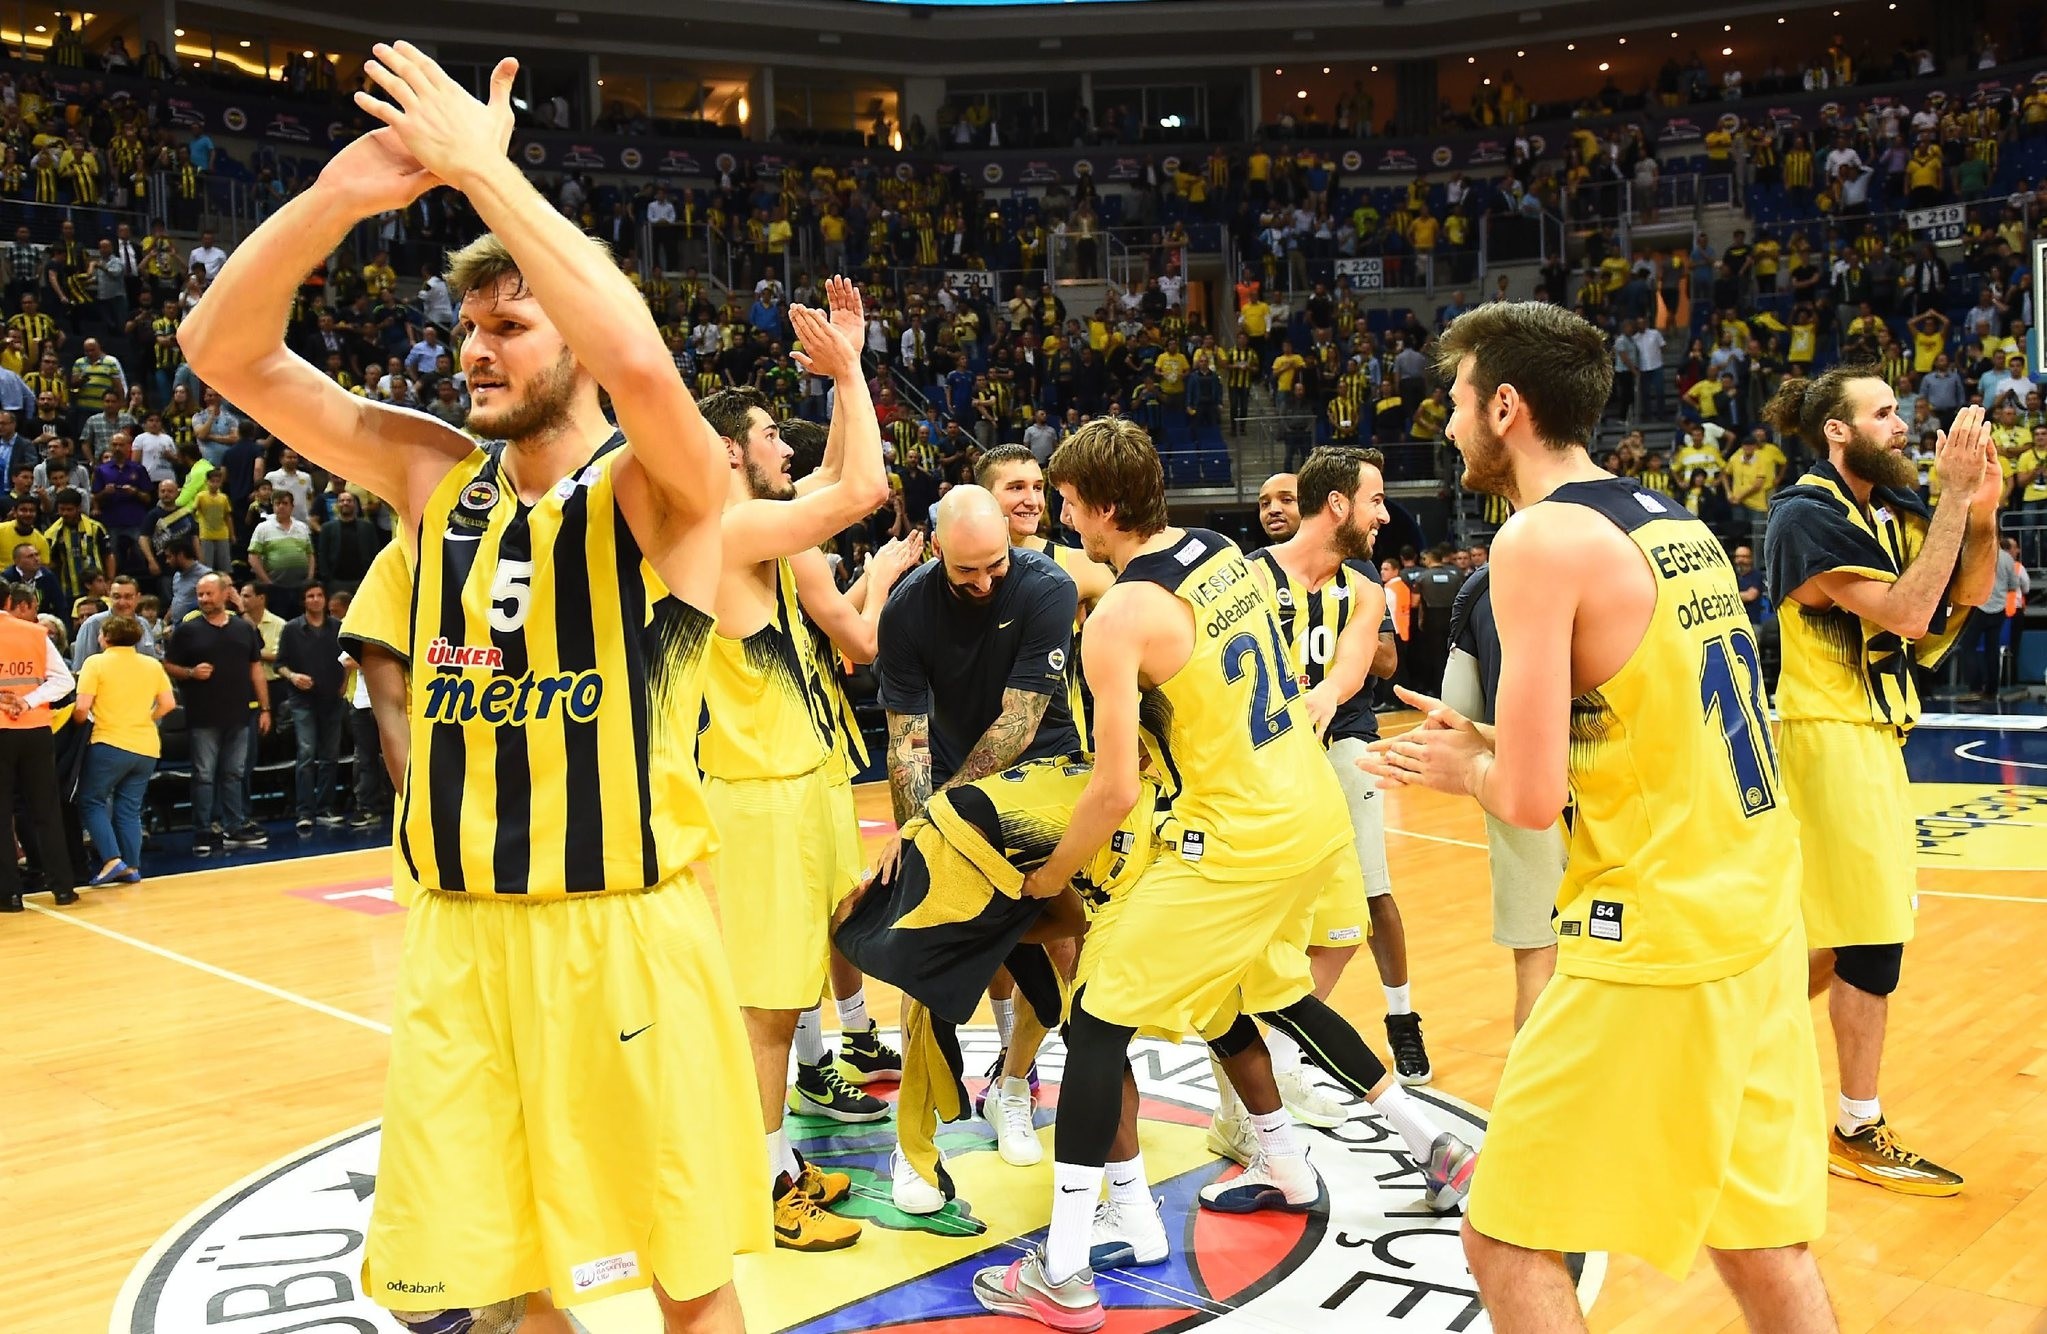 Fenerbahçe crowned Turkish Basketball League champions after beating